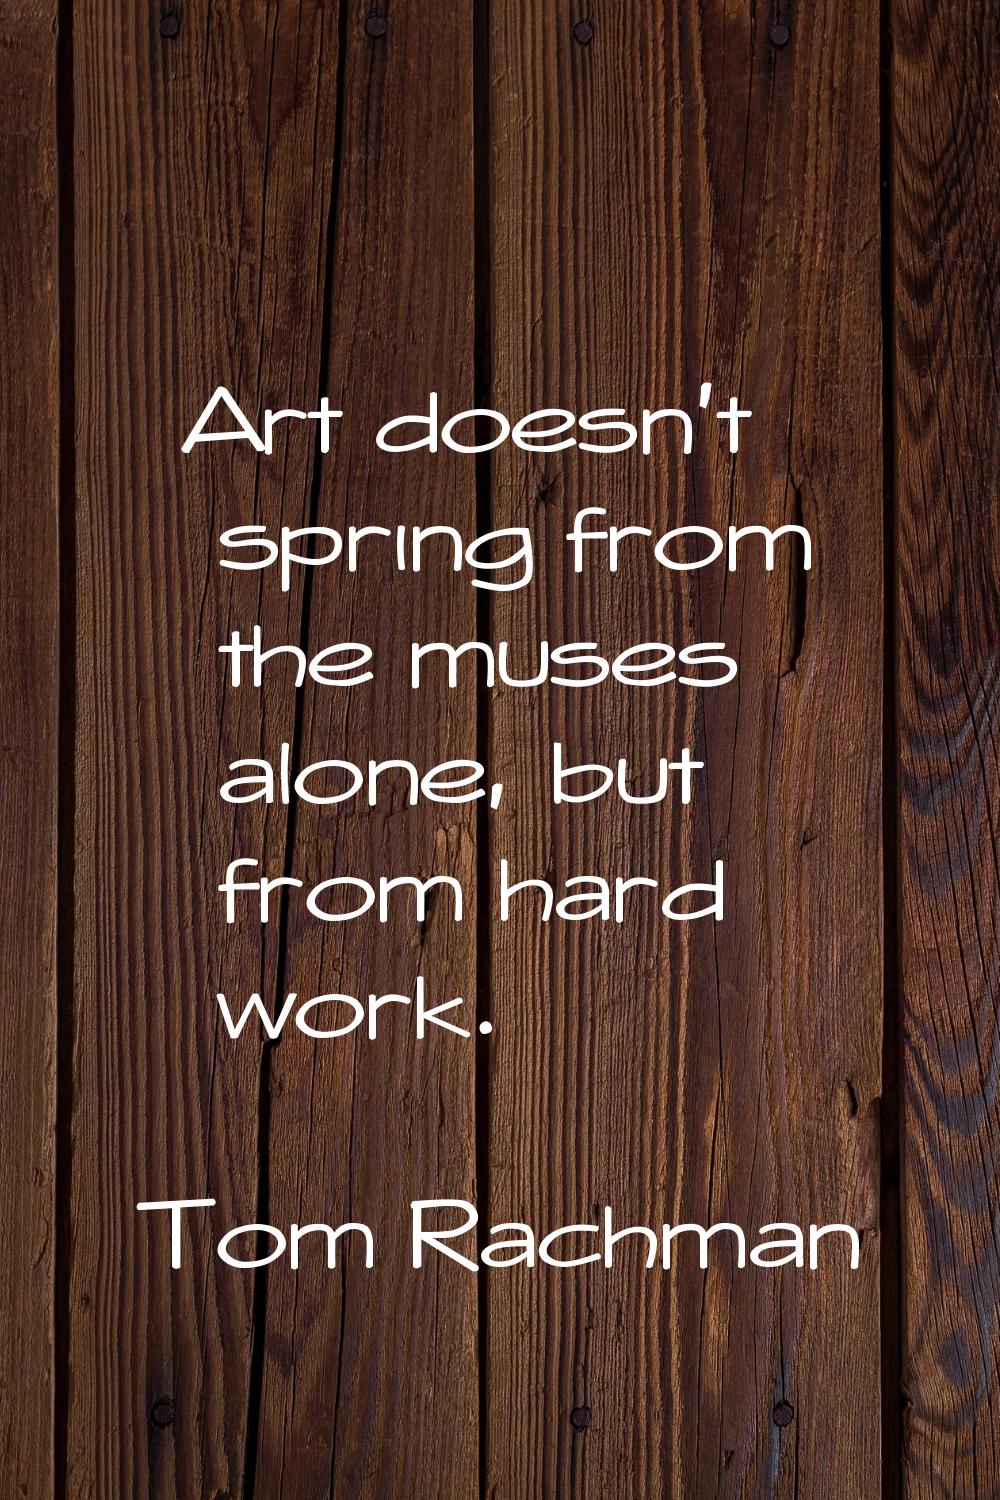 Art doesn't spring from the muses alone, but from hard work.